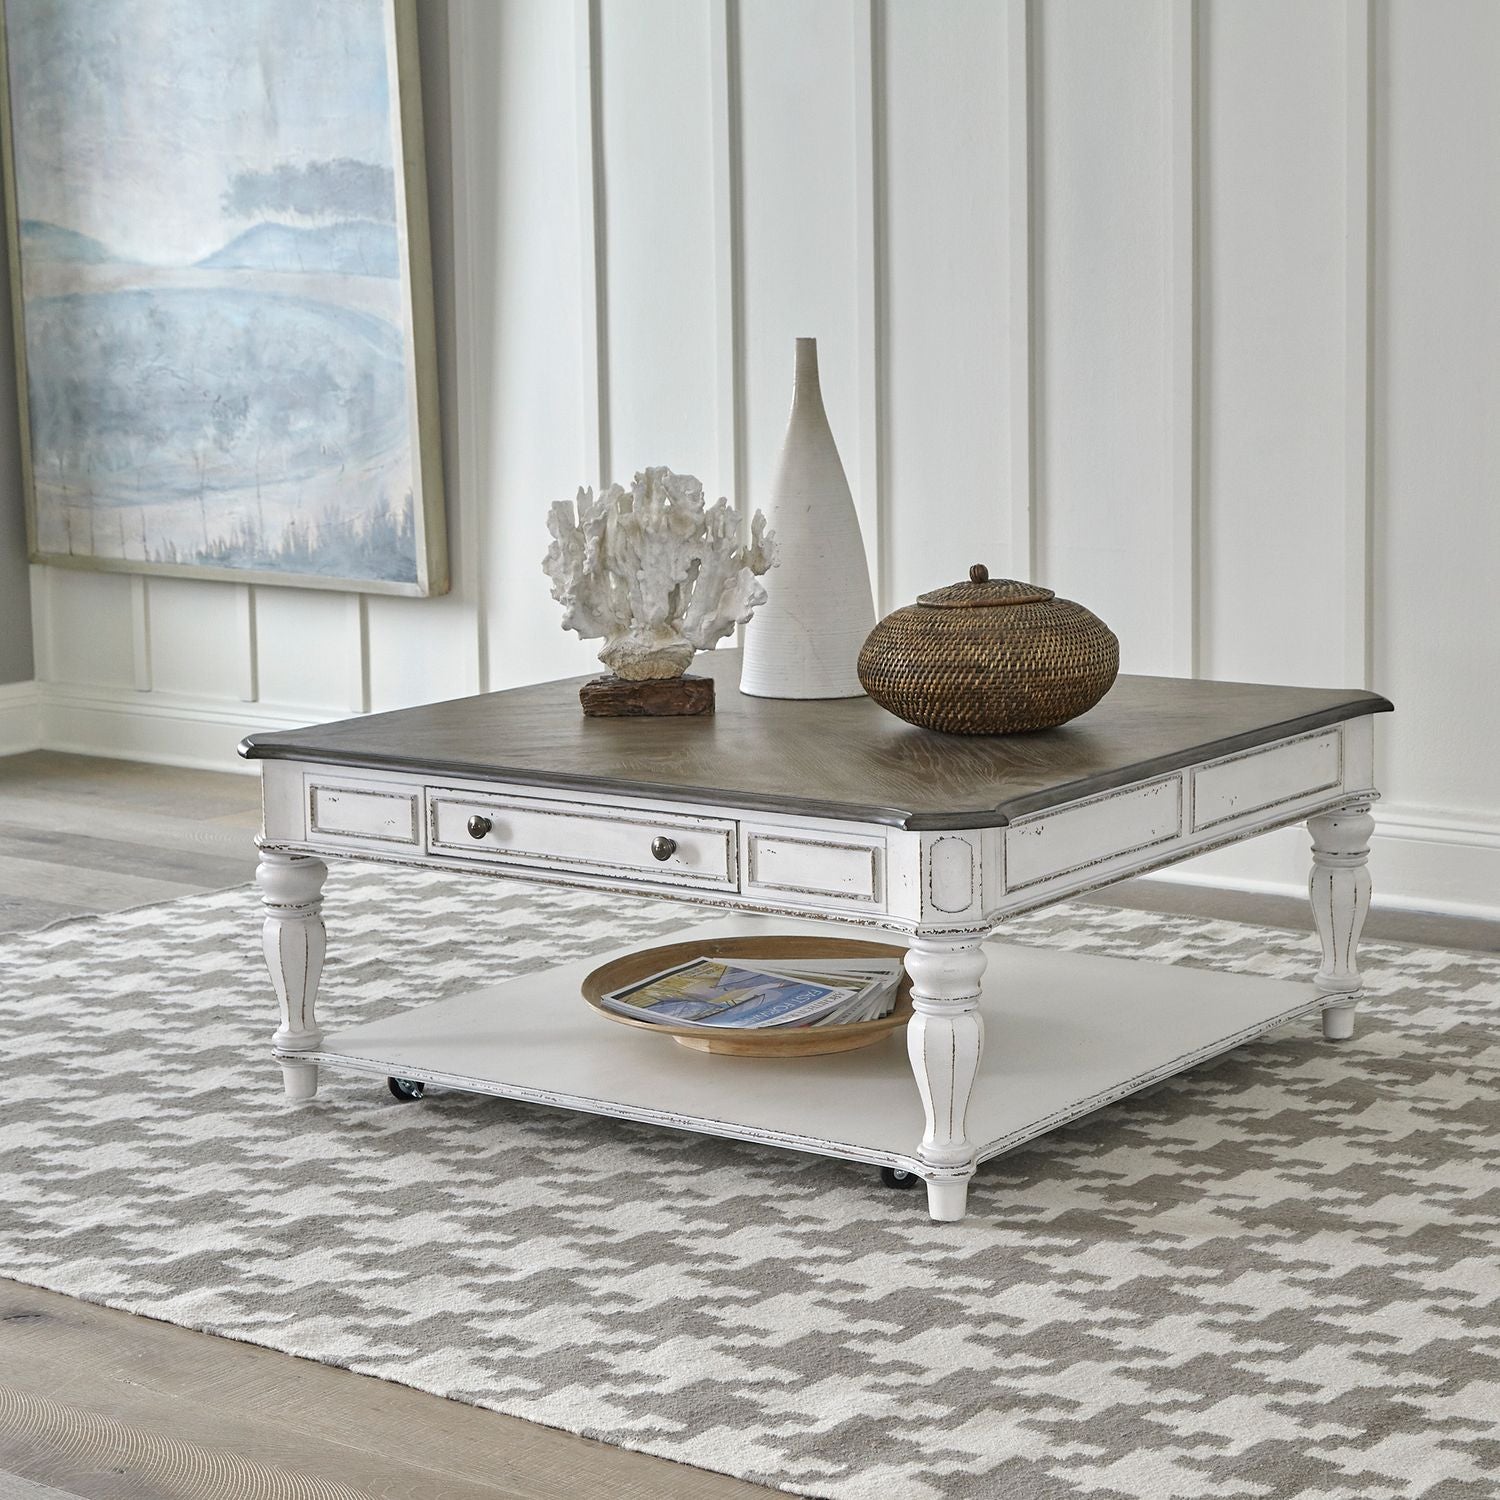 Magnolia Manor Oversized Square Cocktail Table from Liberty Furniture